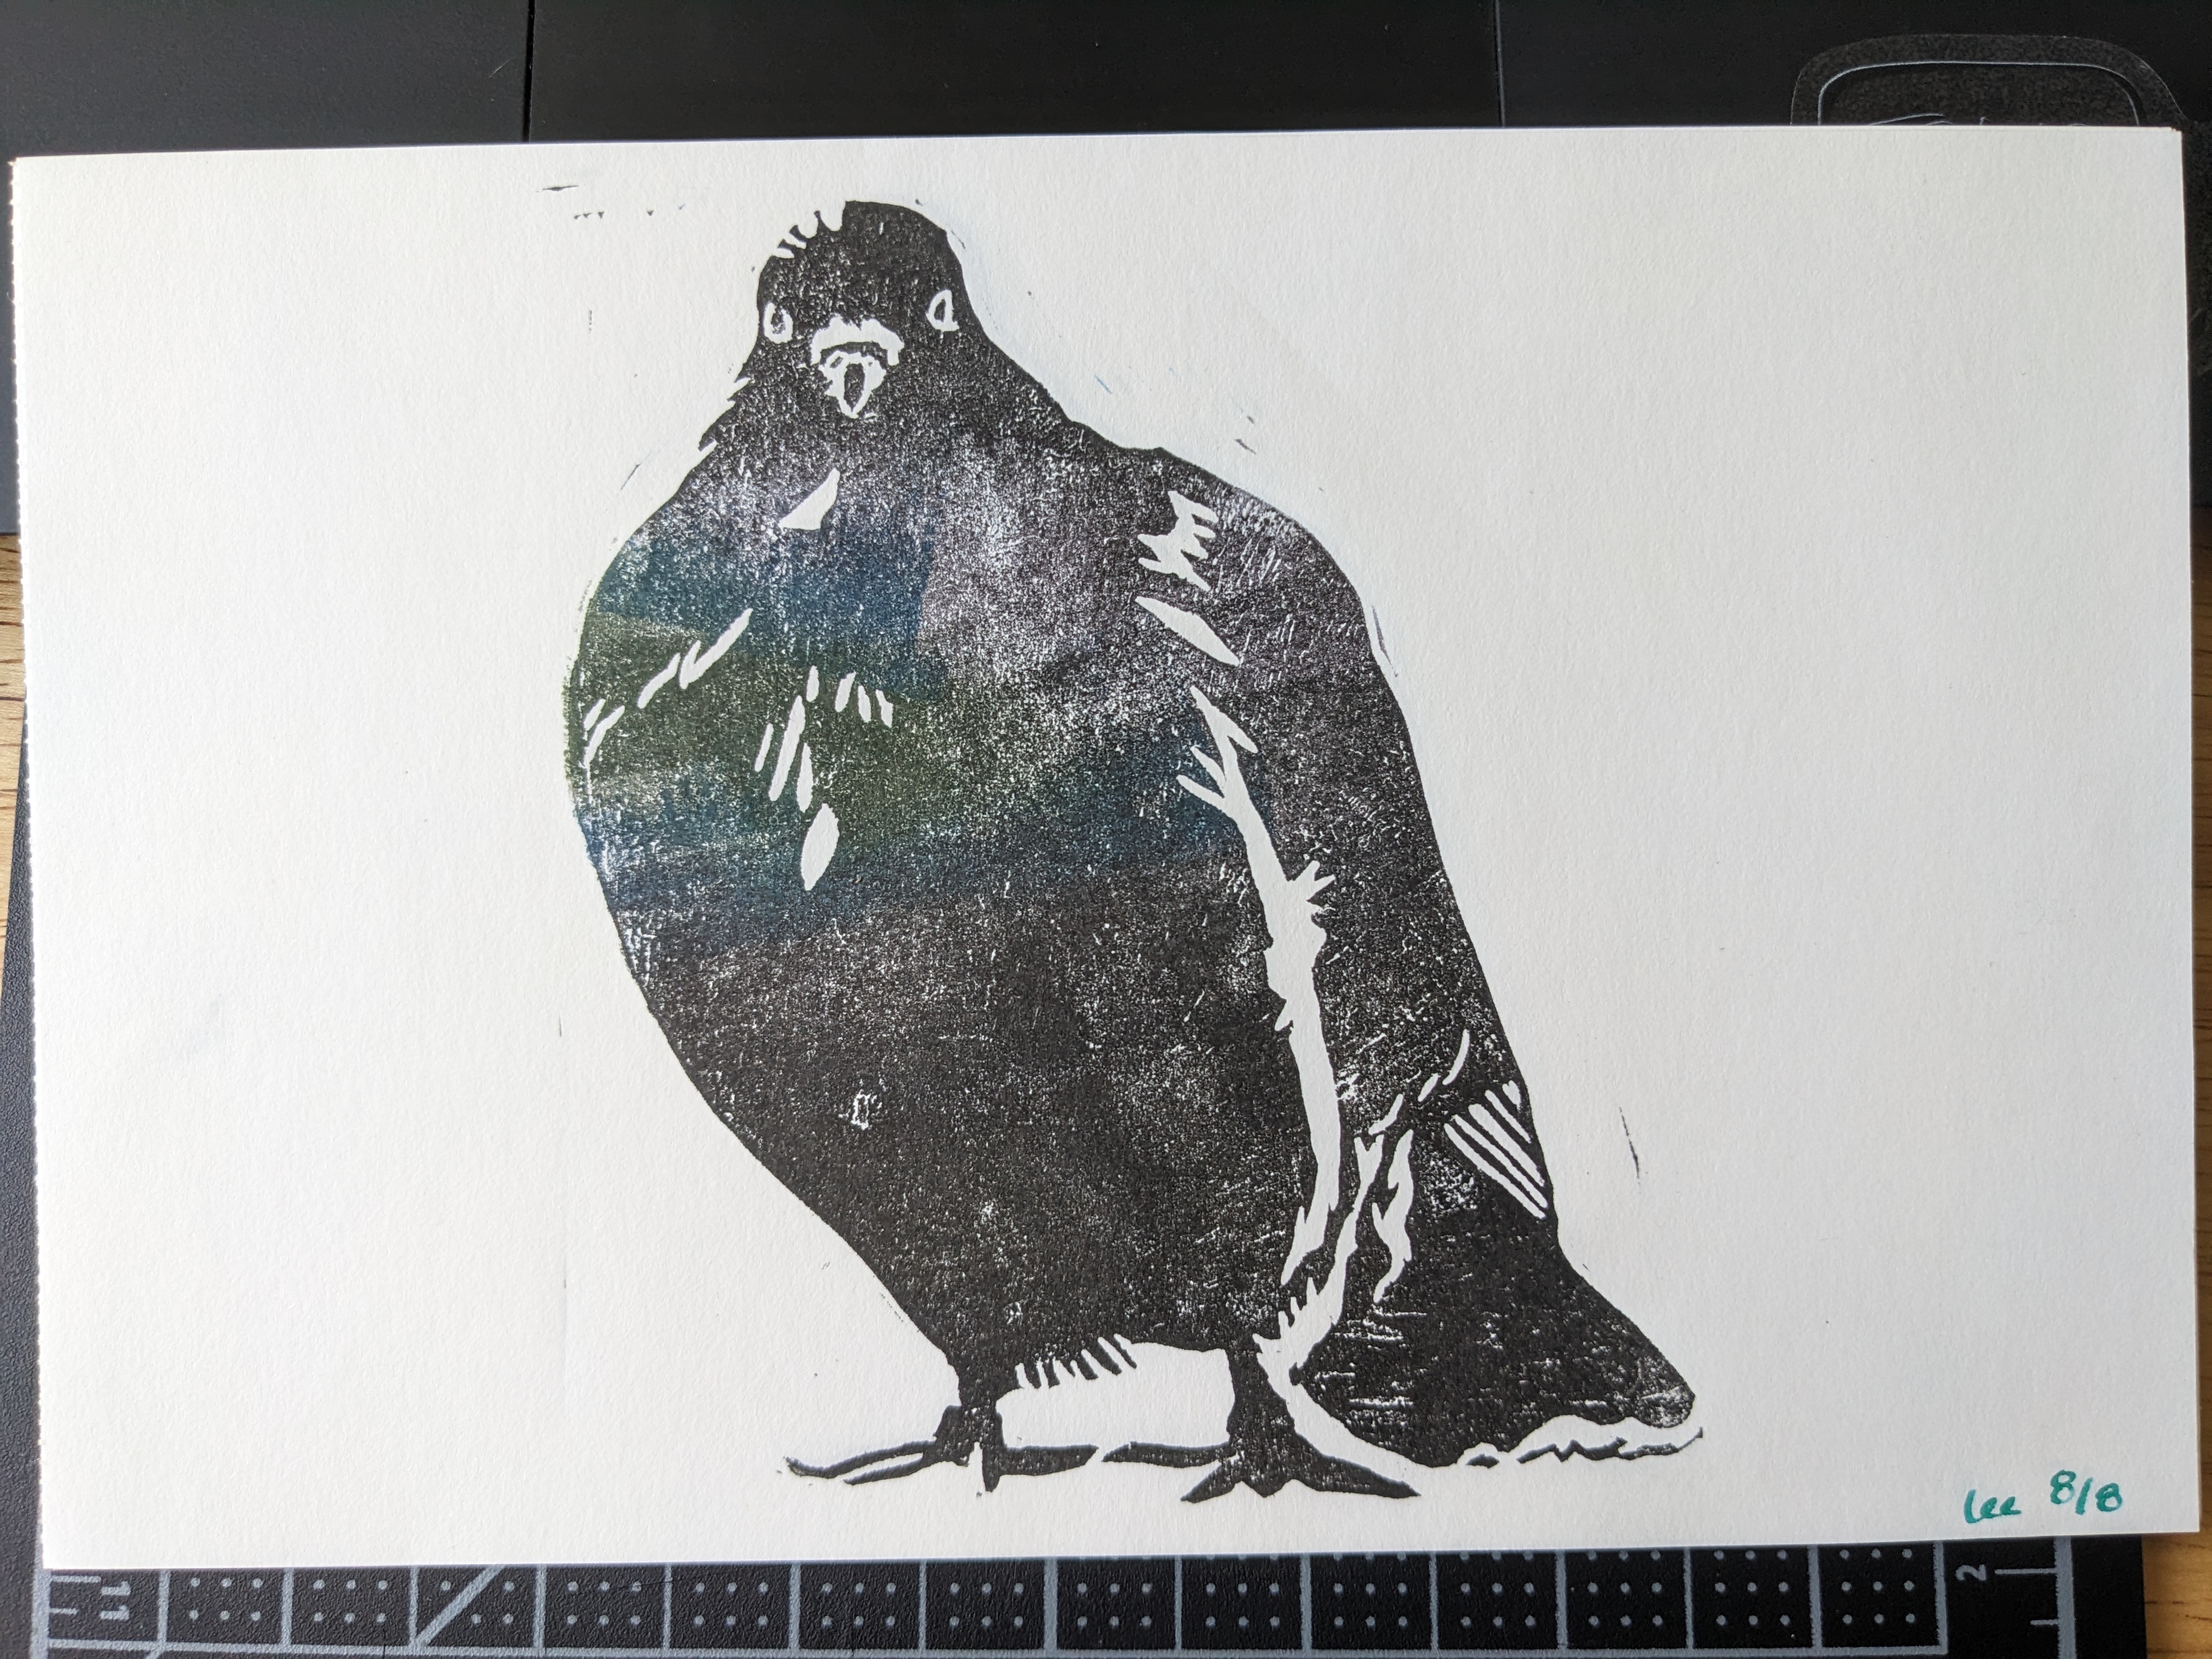 A block print of a superb speciman of pigeon, inked mostly in black but with patches of green, blue, and purple to indicate iridescence.